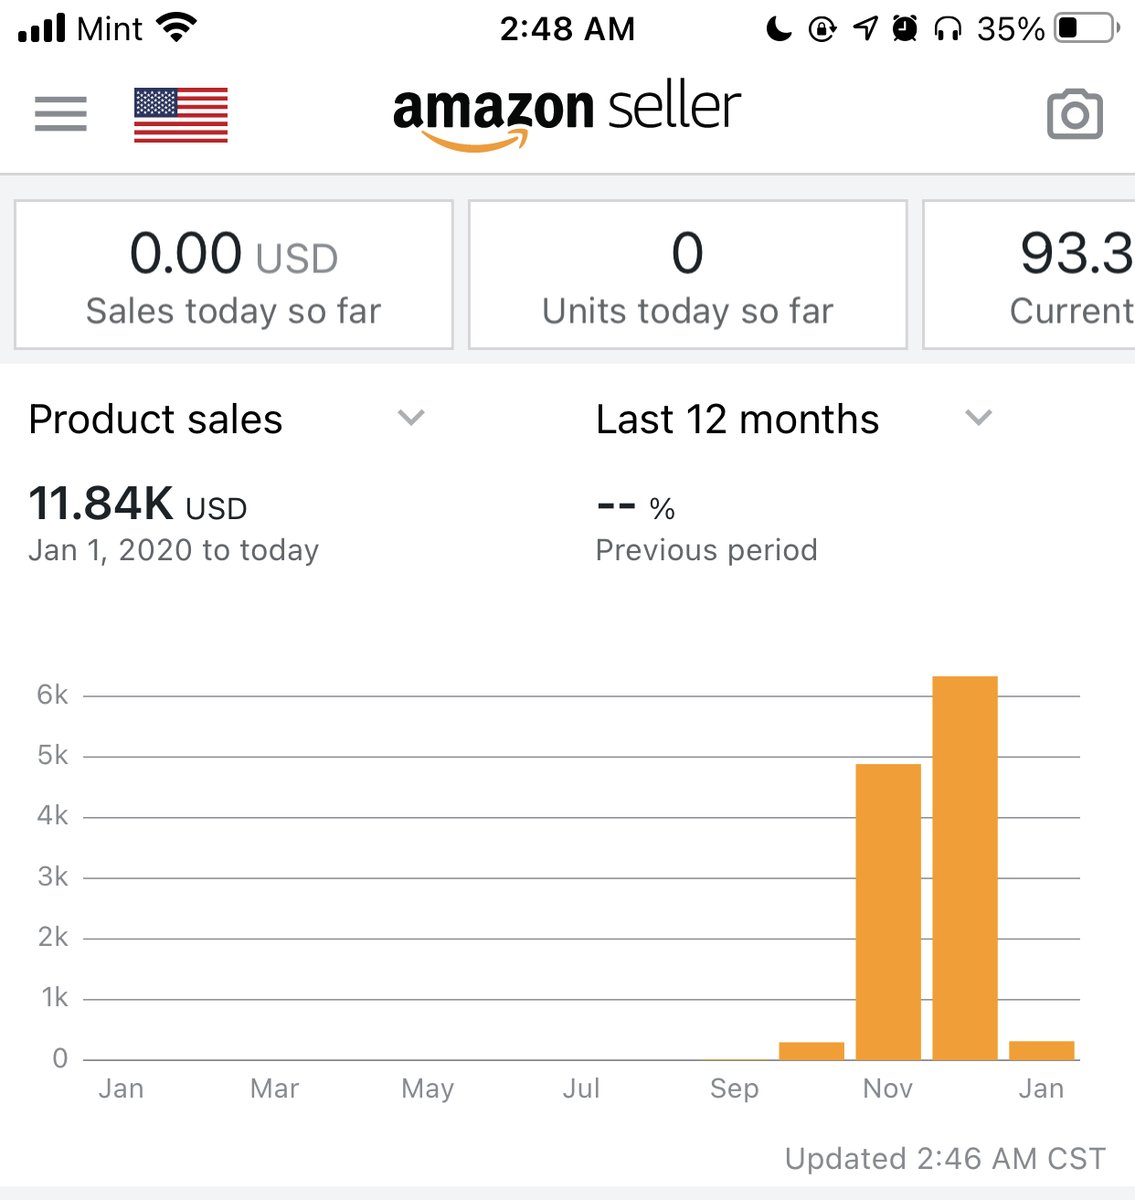 The majority of my income in 2020 comes from Reselling totaling $86,277.18$11,525 from Amazon and $74,437.18 from eBay54% ROI (Profit) makes take home pay $46,419.57 after costsP.S. This doesn't include any cash sales 